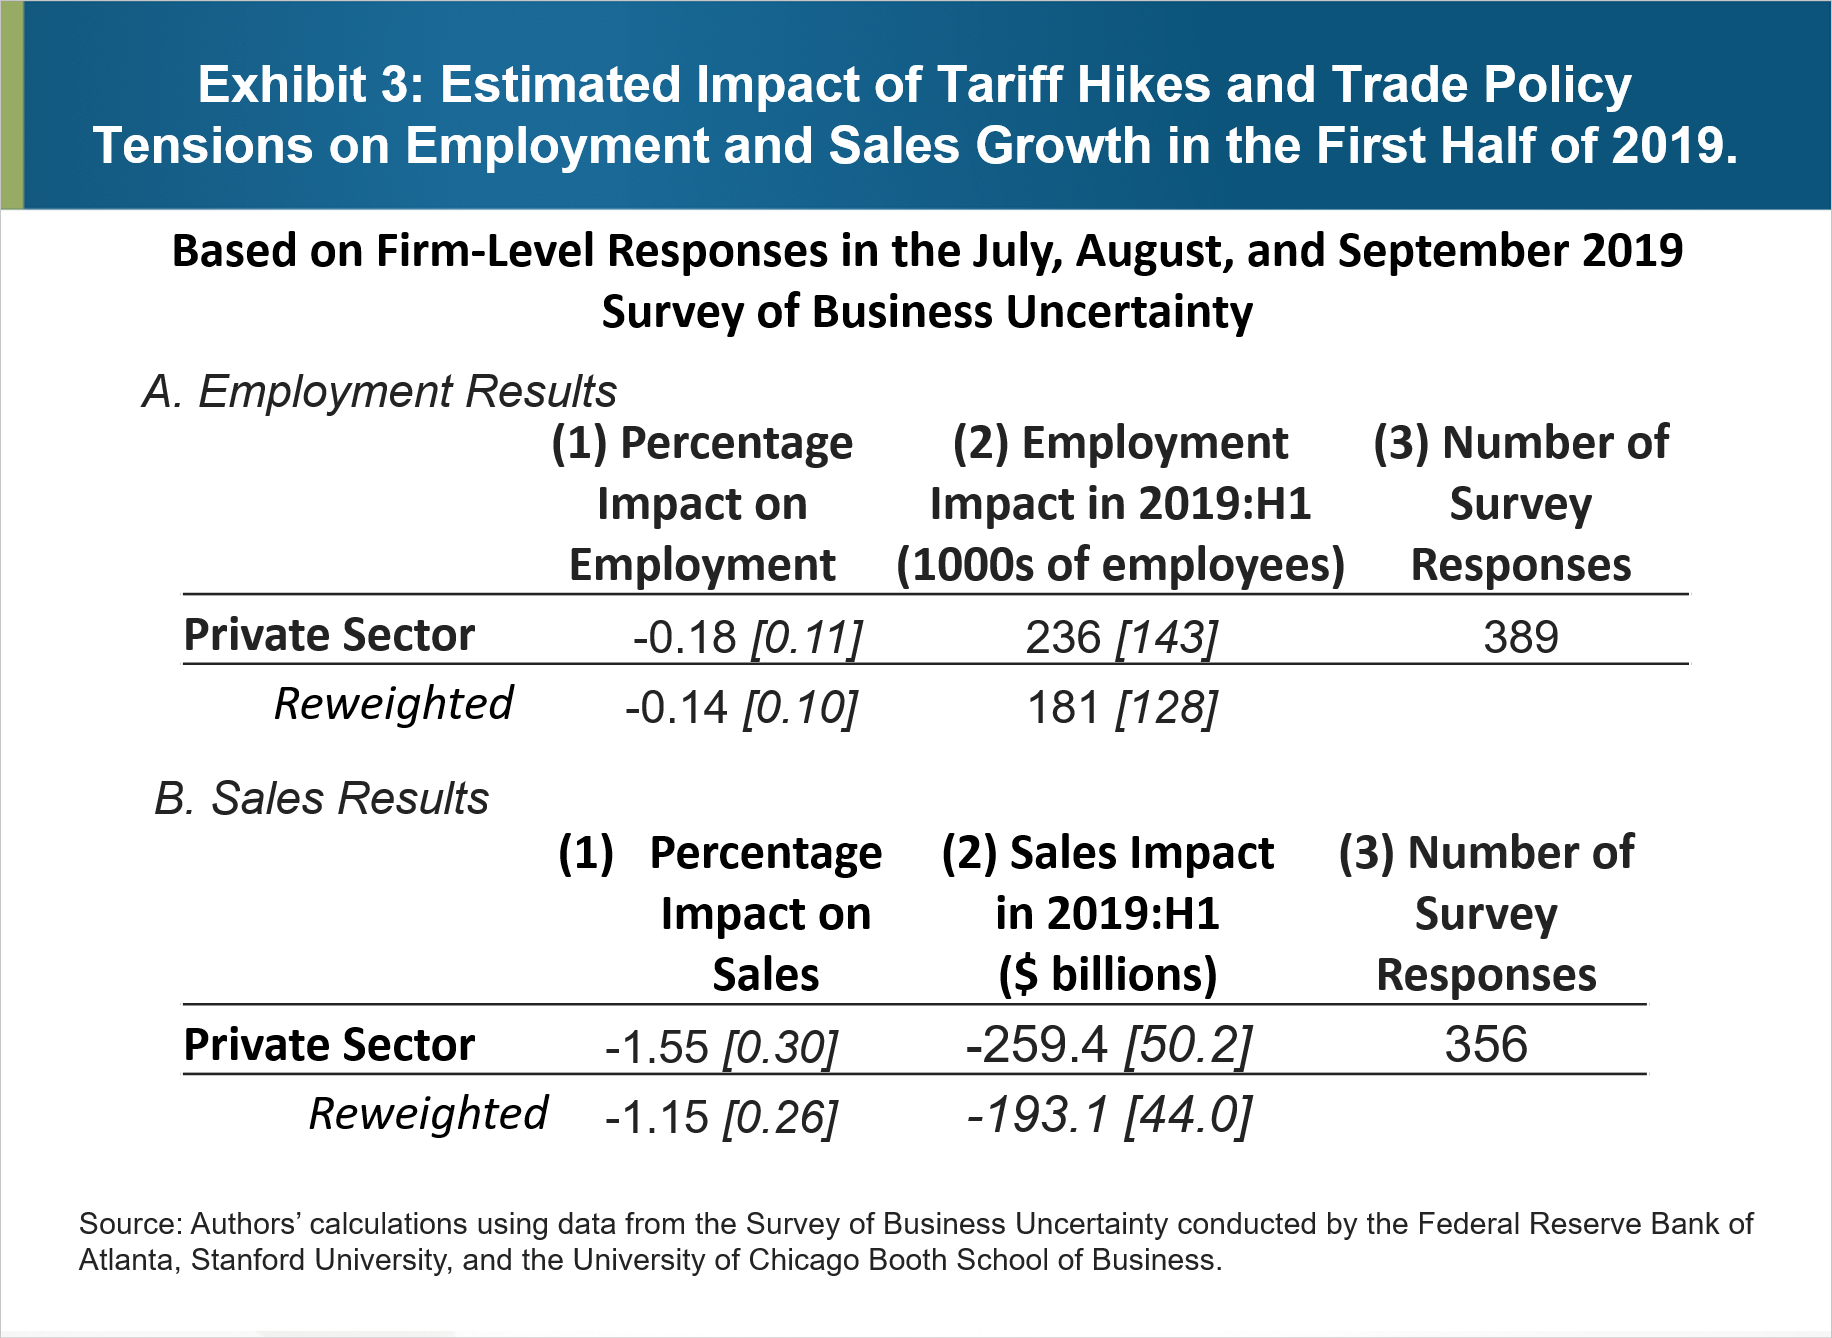 Exhibit 3: Estimated Impact of Tariff Hikes and Trade Policy Tensions on Employment and Sales Growth in the First Half of 2019